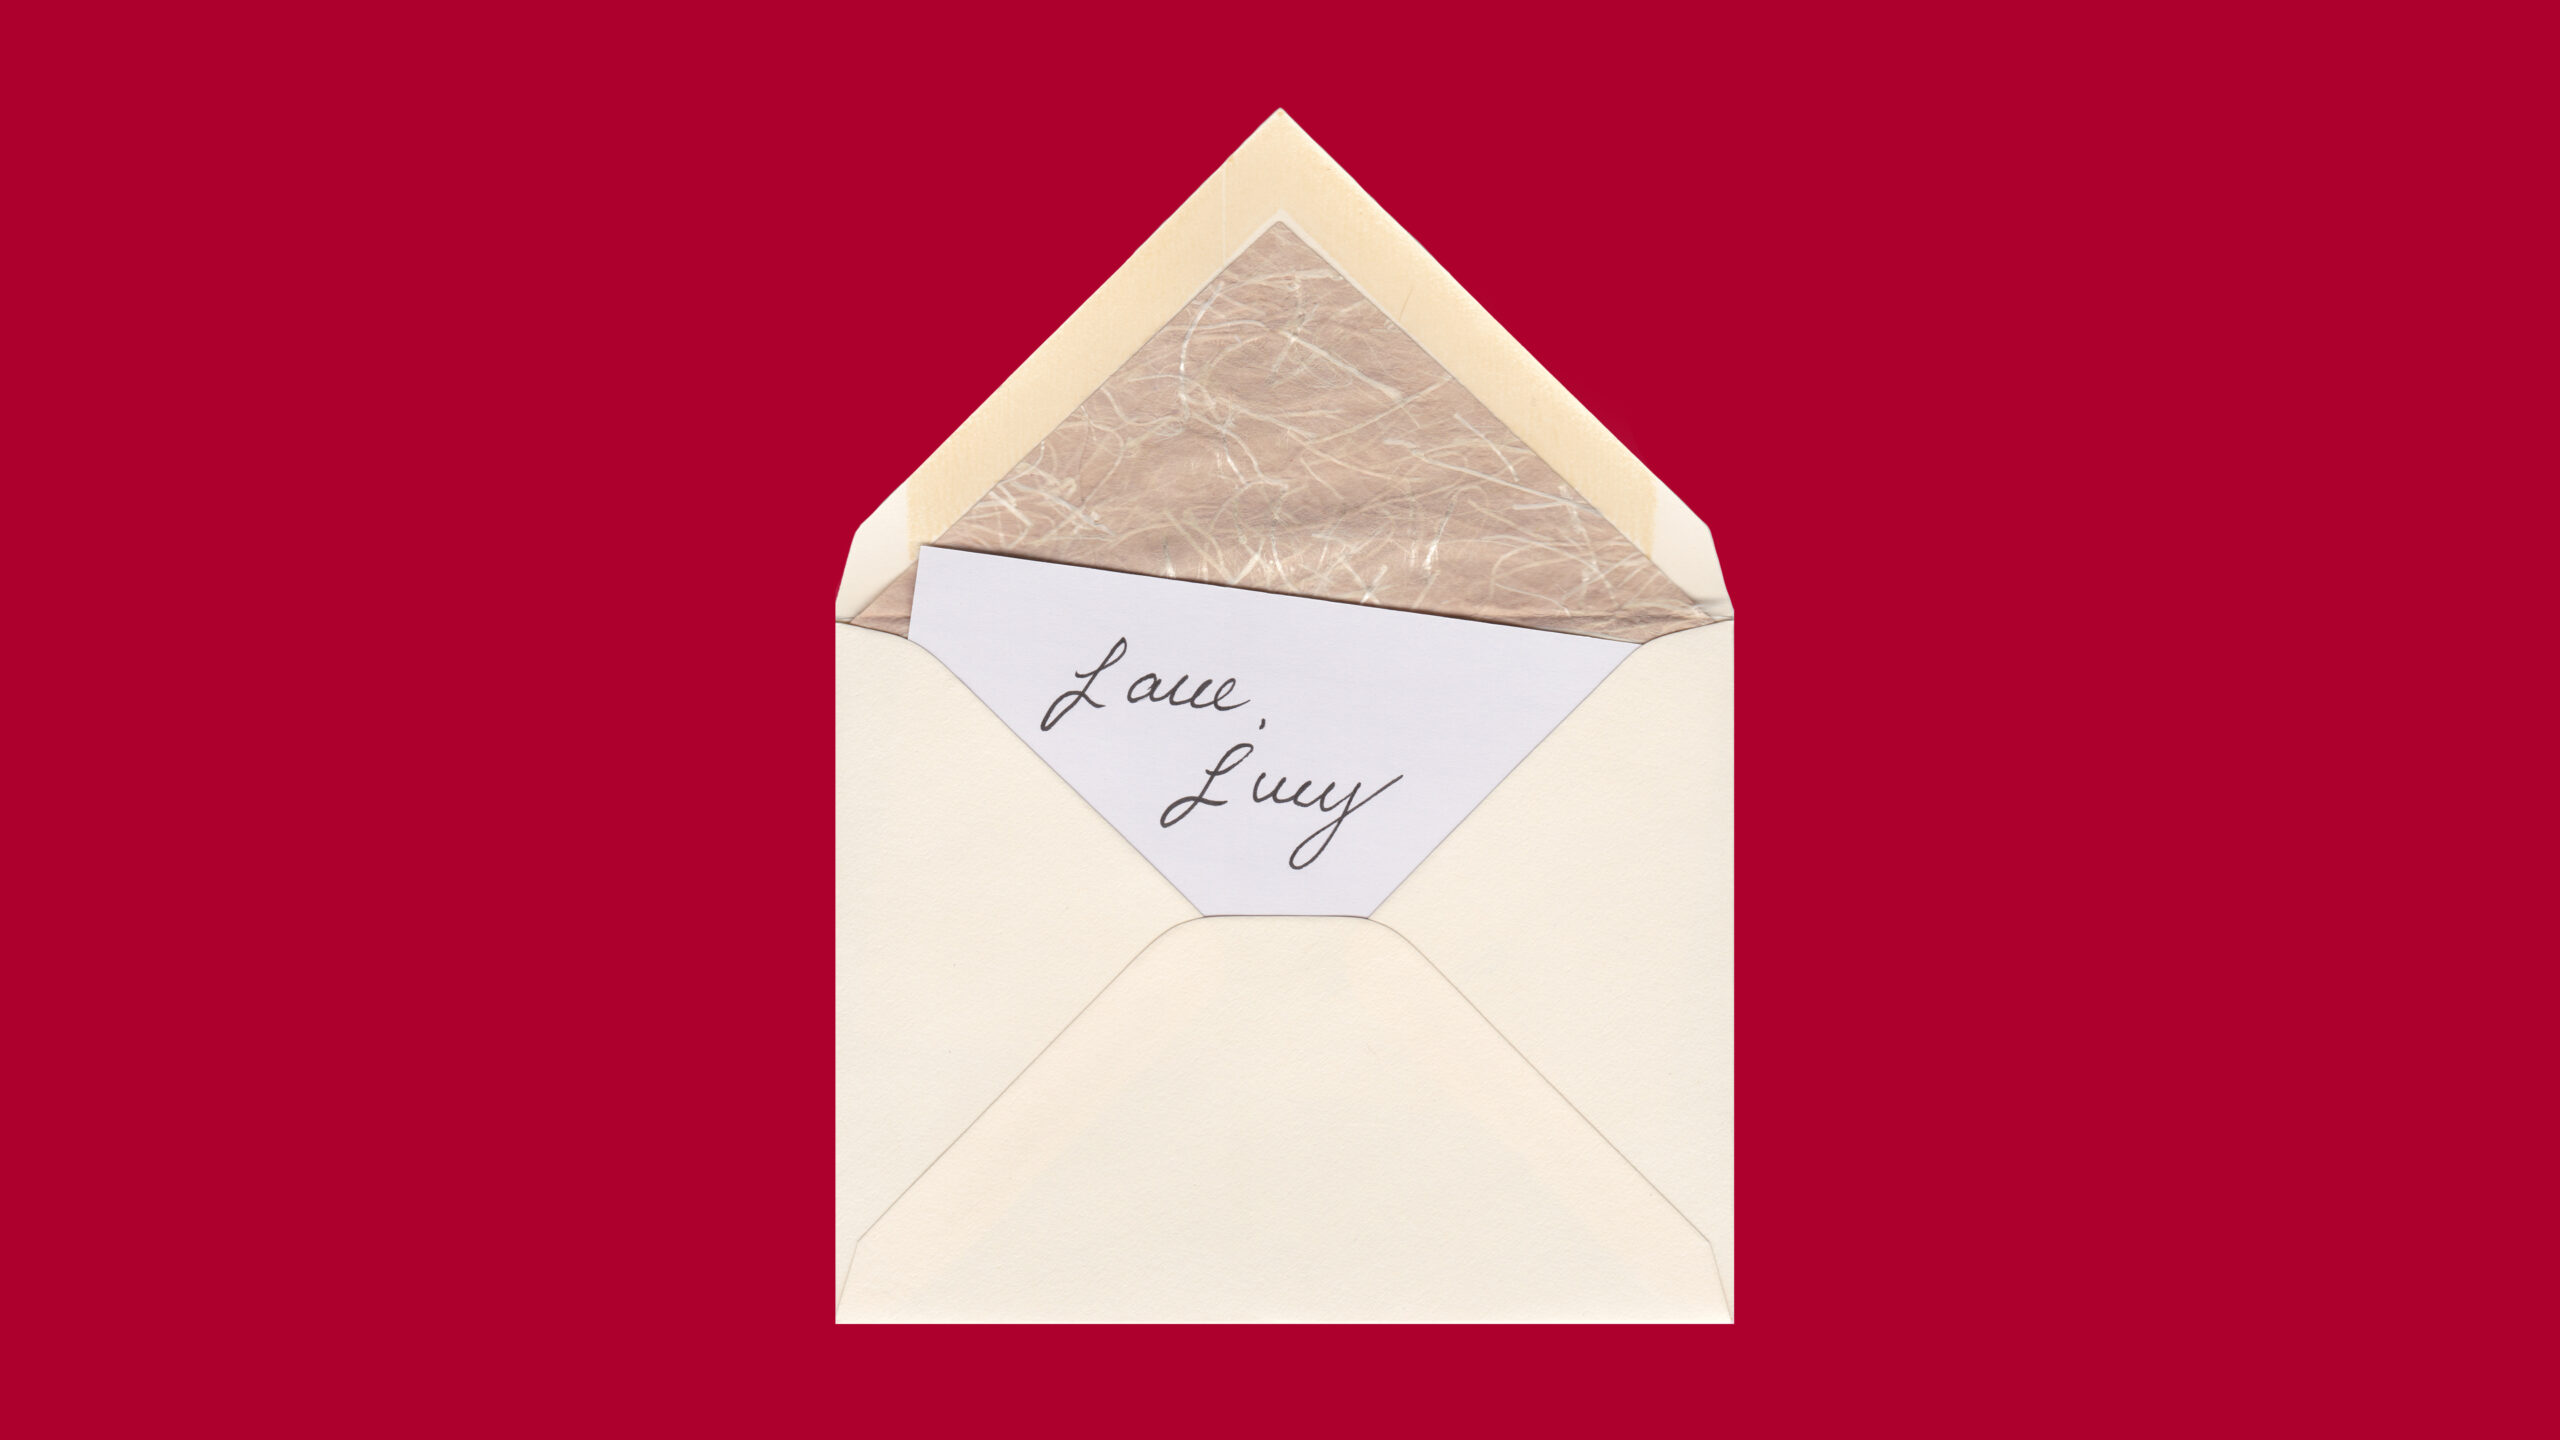 white envelope with red background, Open envelope with Love, Lucy written on a note